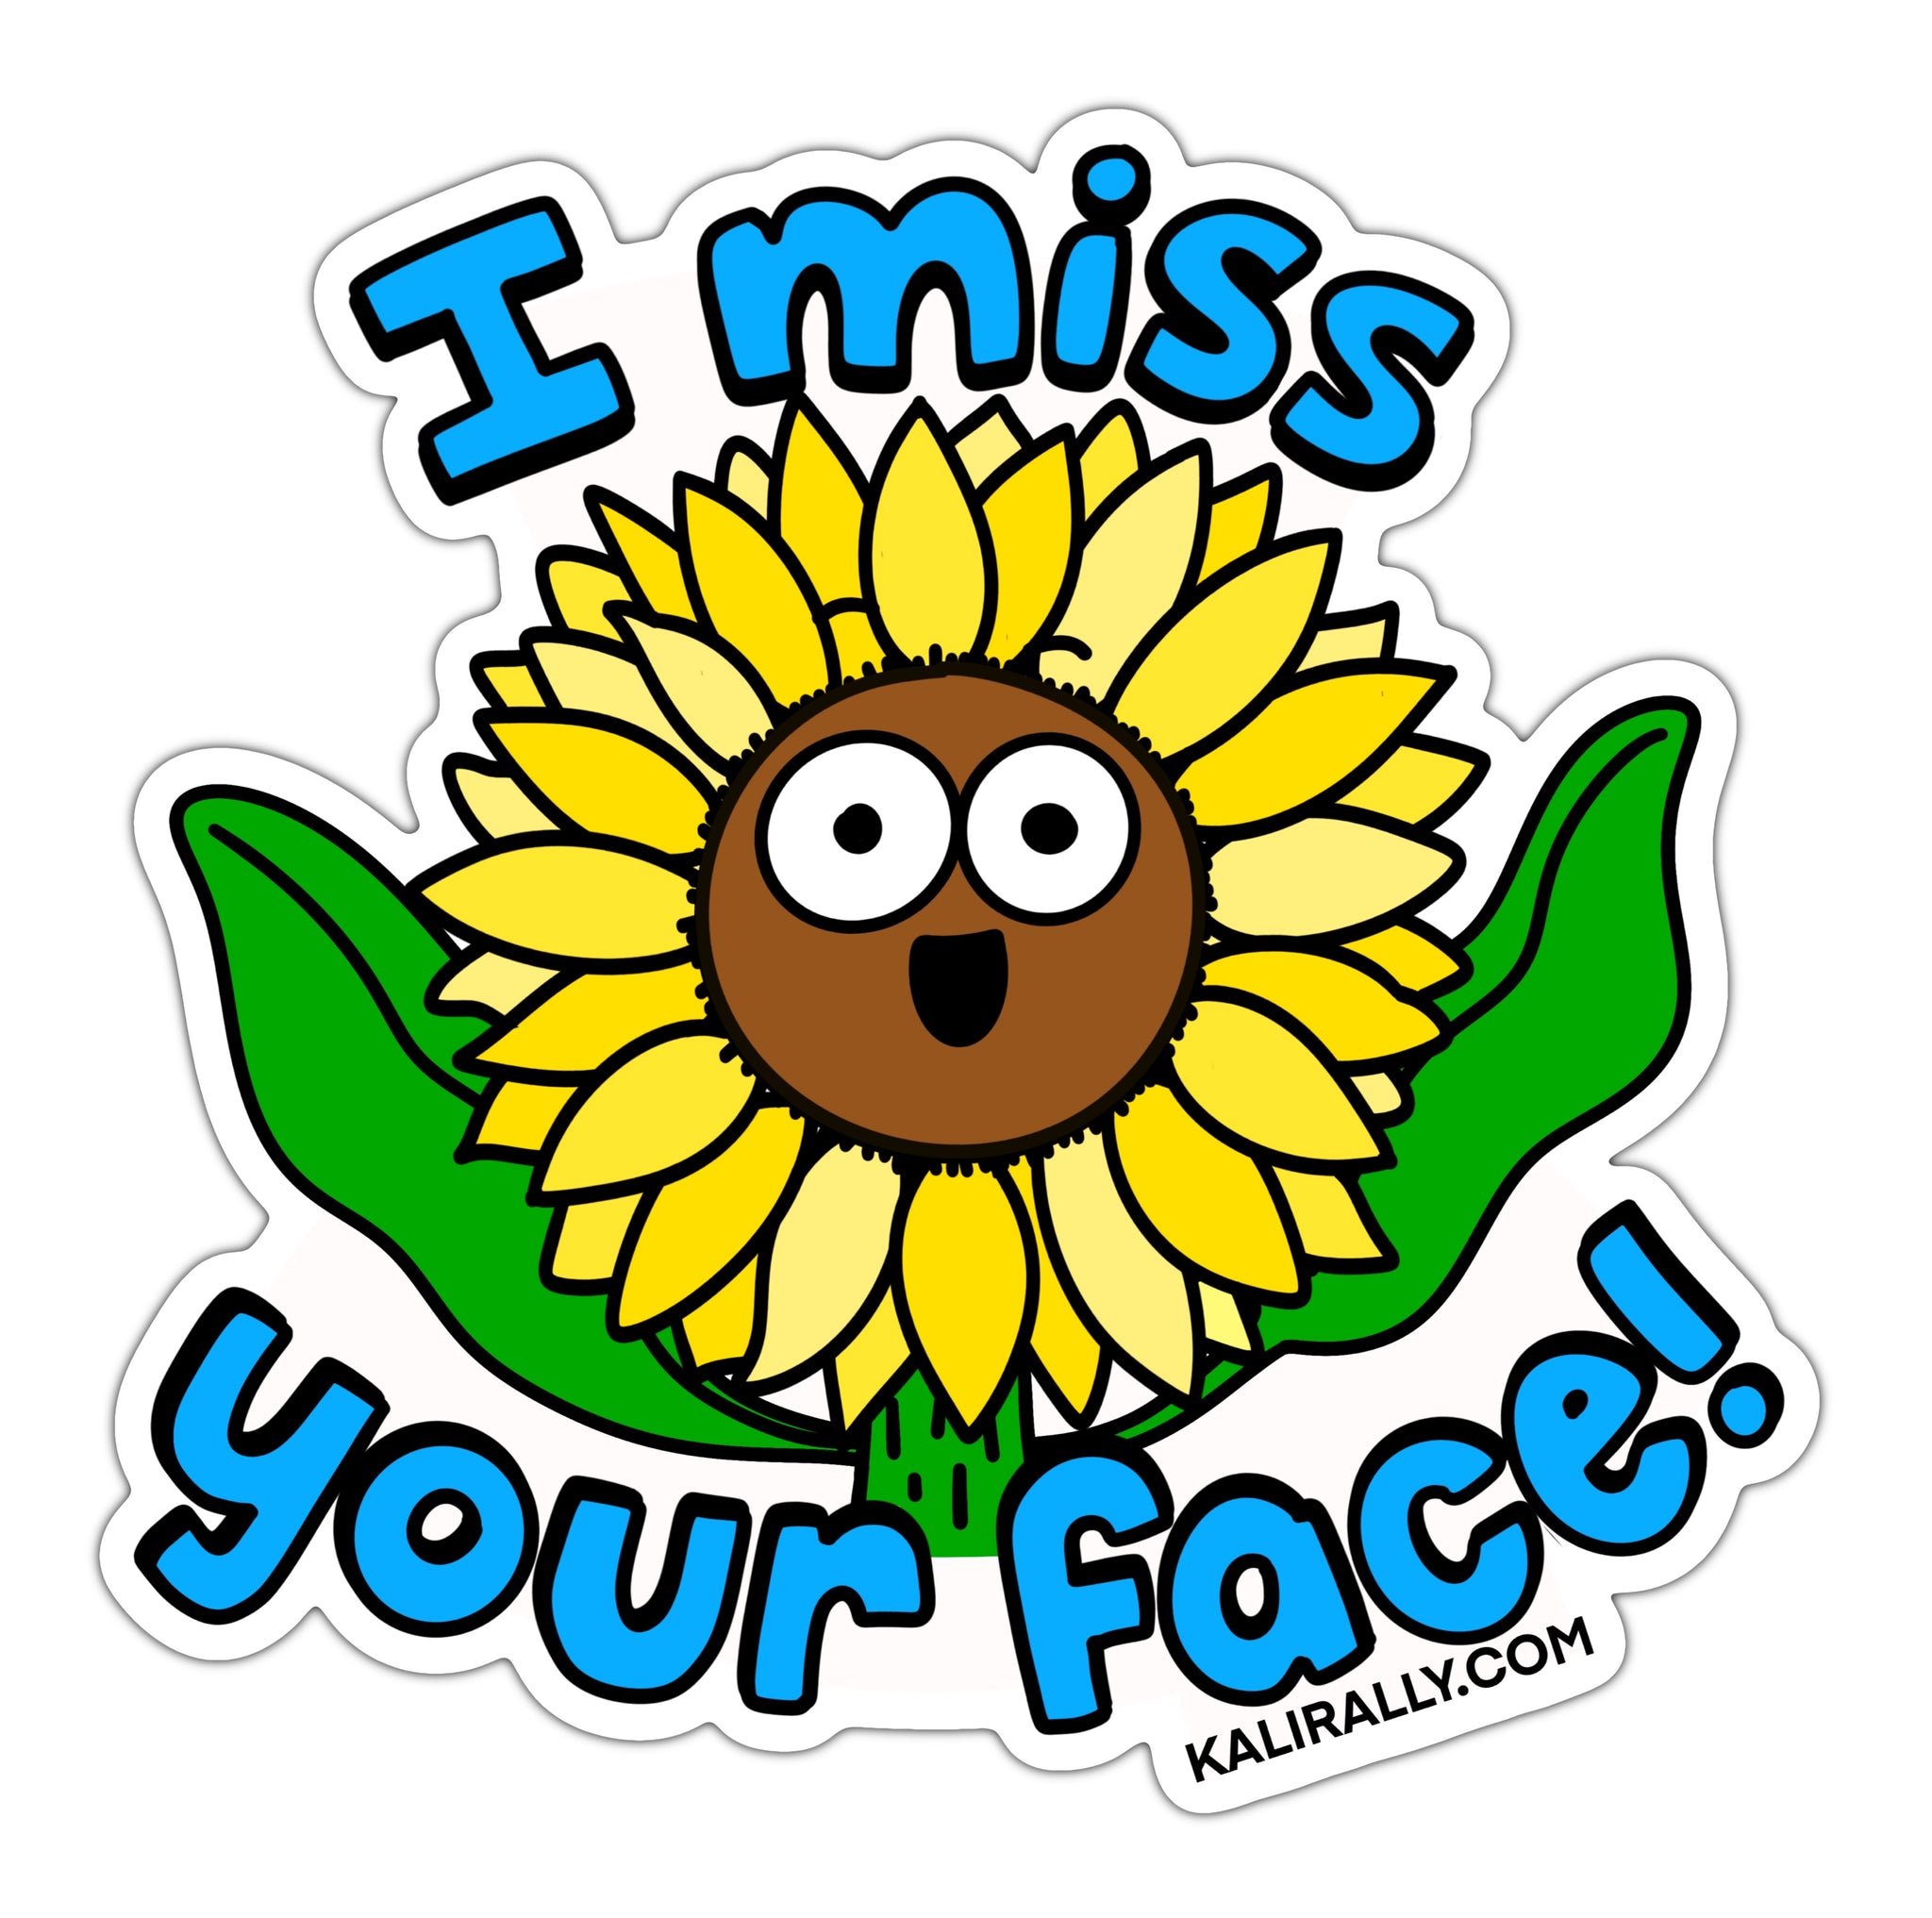 Miss you sticker, funny "I miss your face" decal